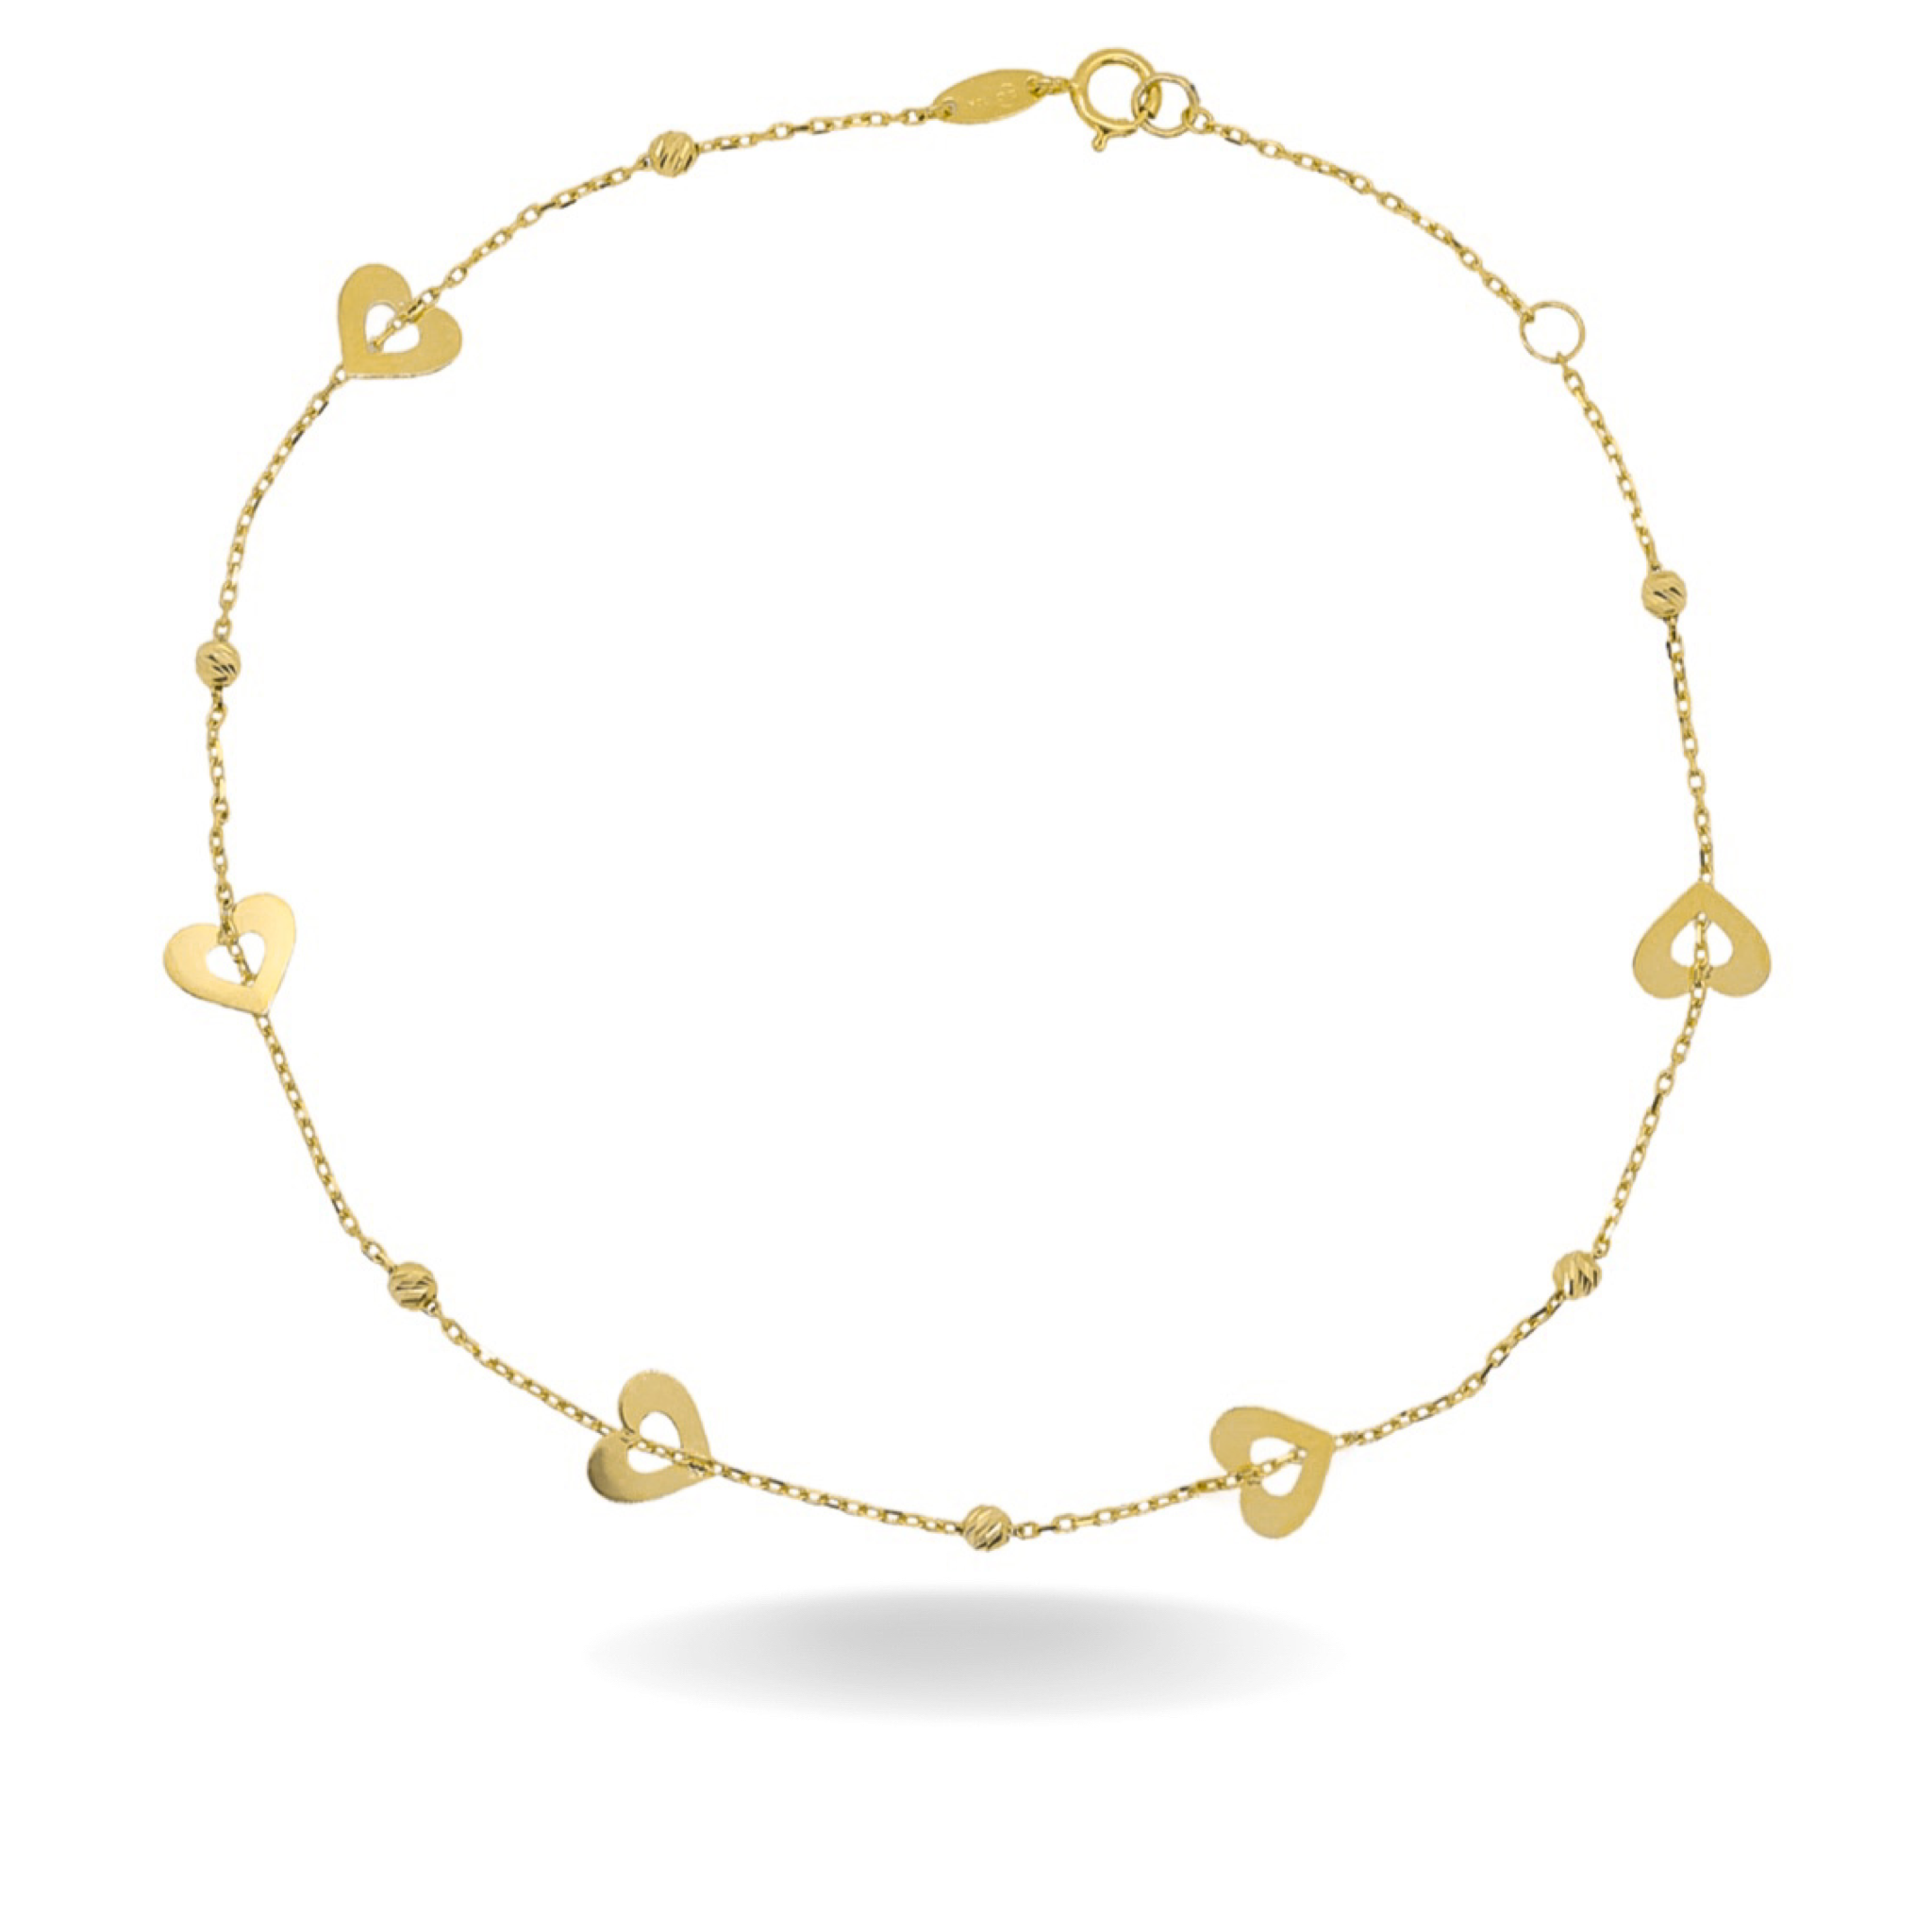 10K YELLOW GOLD SWEETHEART ANKLET